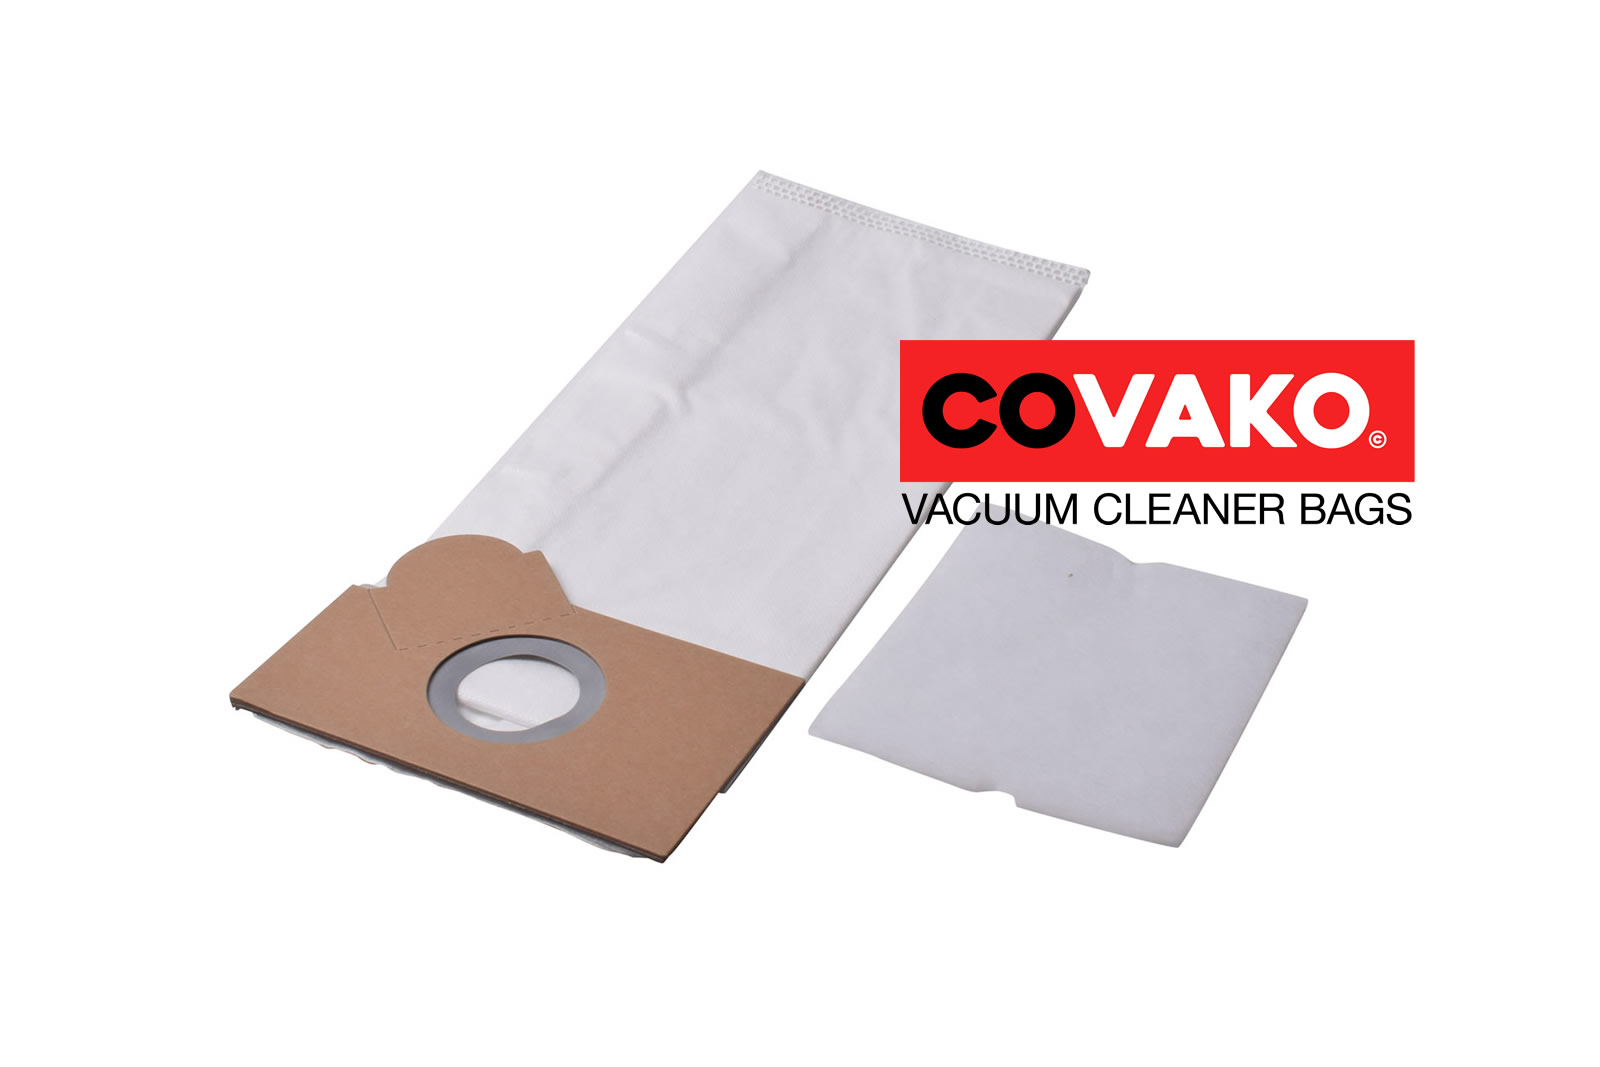 Fakir RS 17 E / Synthesis - Fakir vacuum cleaner bags